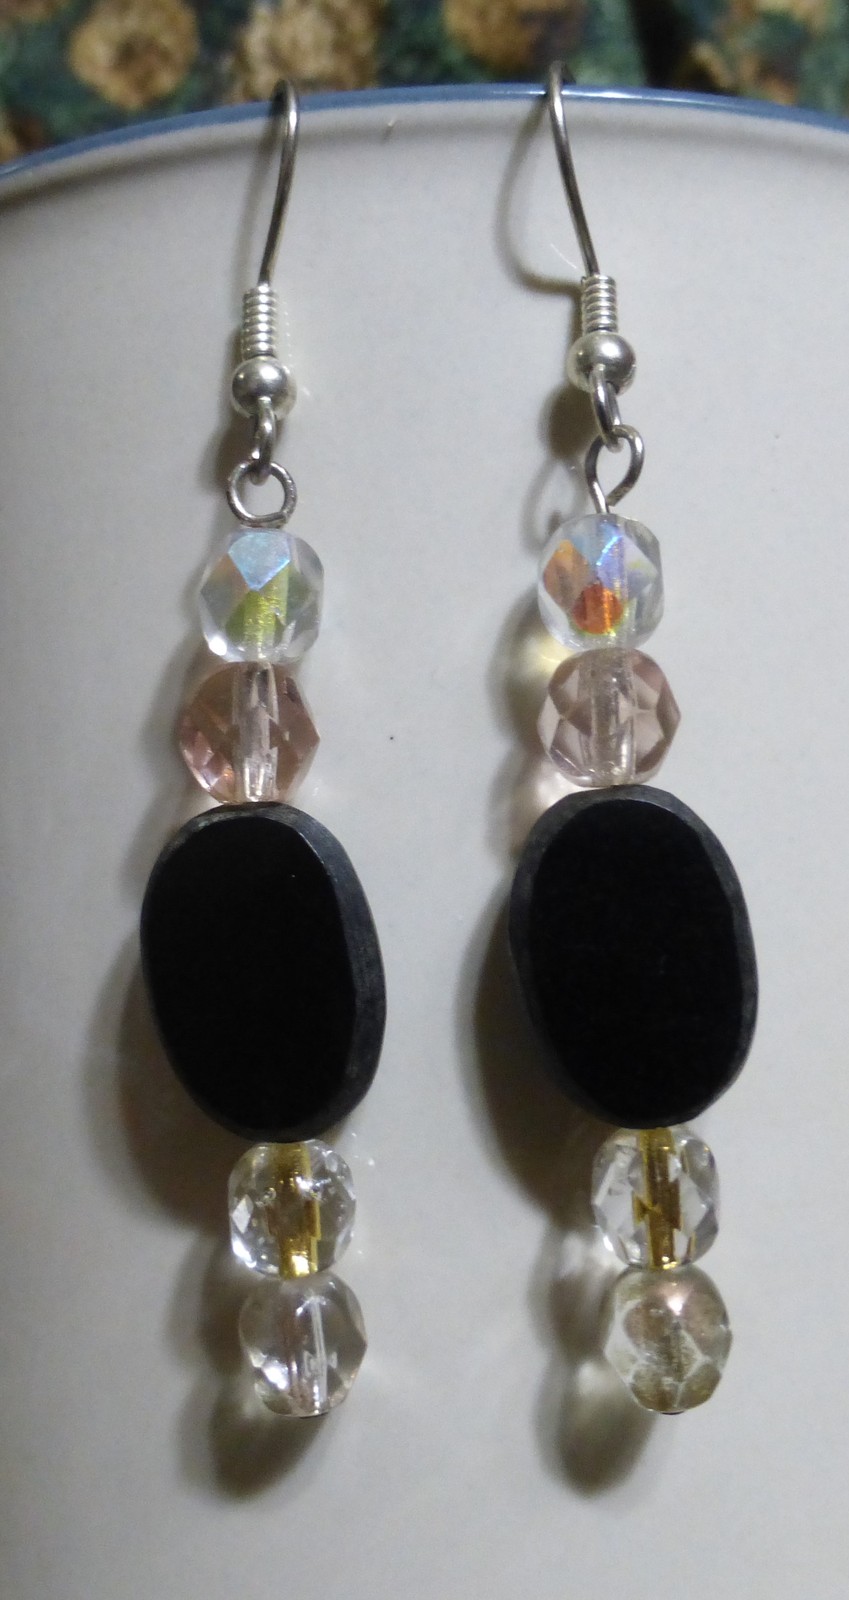 Cheap Elegance Handcrafted Dangle Earrings Black Faceted Sparkly AB ...